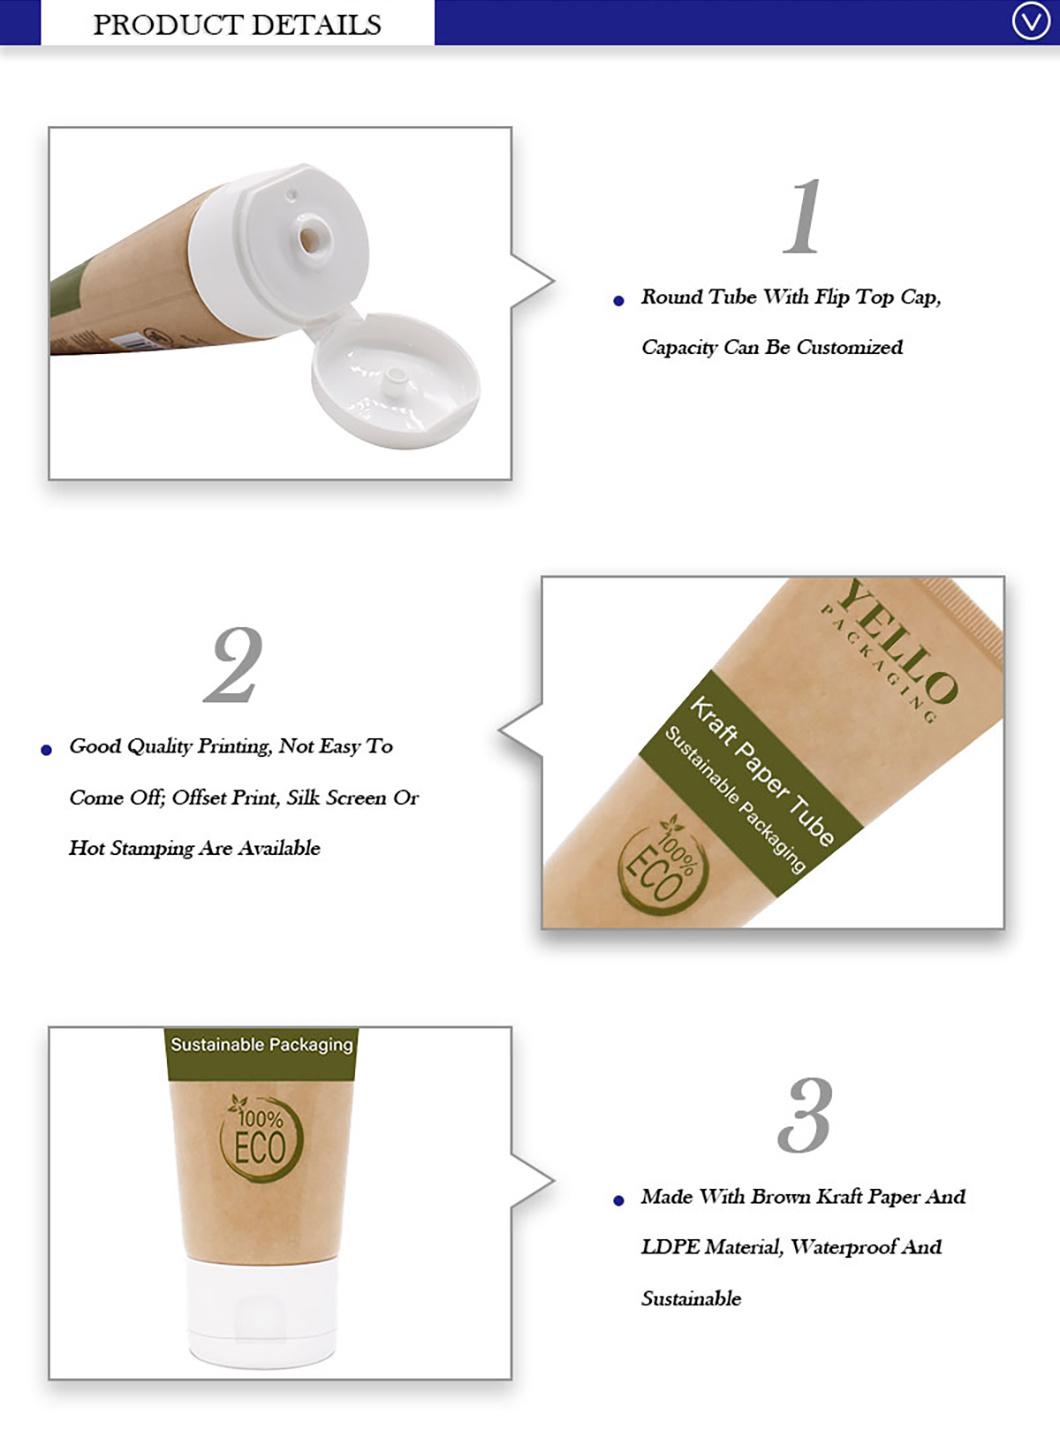 New Design Body Cream Lotion Container Hot Selling Eco-Friendly Kraft Paper Tube